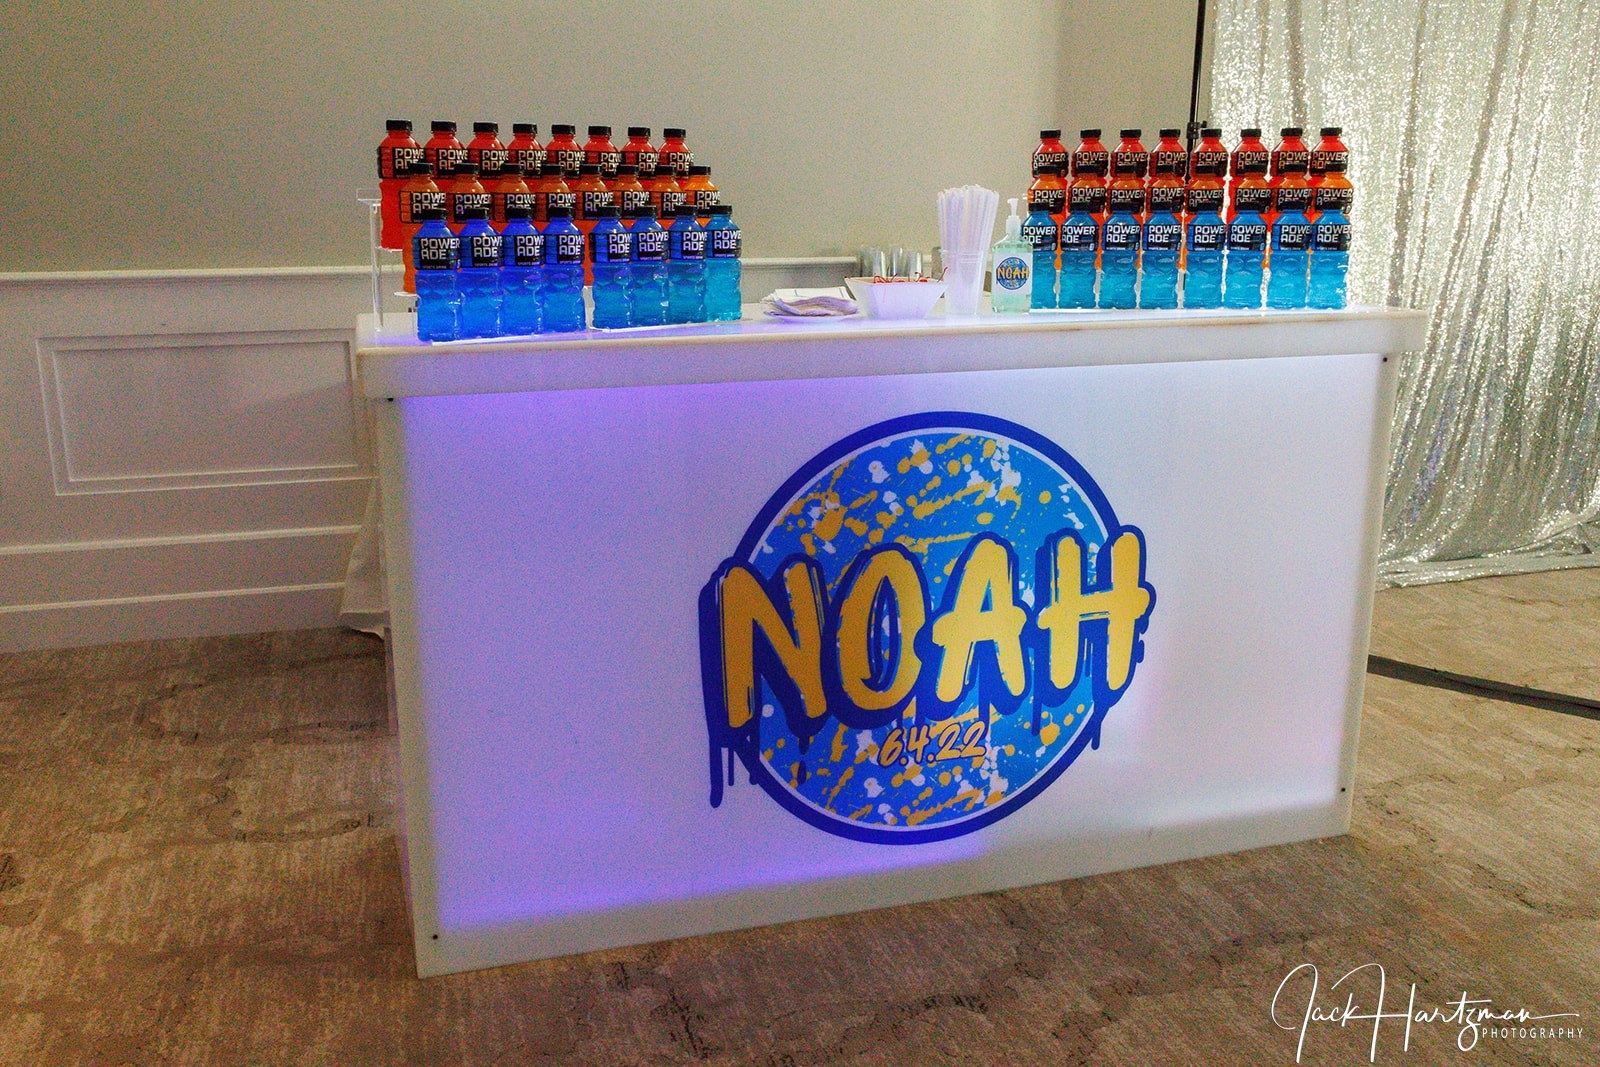 Kids soda bar at Noah's Chargers-Inspired Urban, Graffiti Bar Mitzvah at Woodmont Country Club in Rockville, MD | Pop Color Events | Adding a Pop of Color to Bar & Bat Mitzvahs in DC, MD & VA | Photo by: Jack Hartzman, Washington Talent Agency